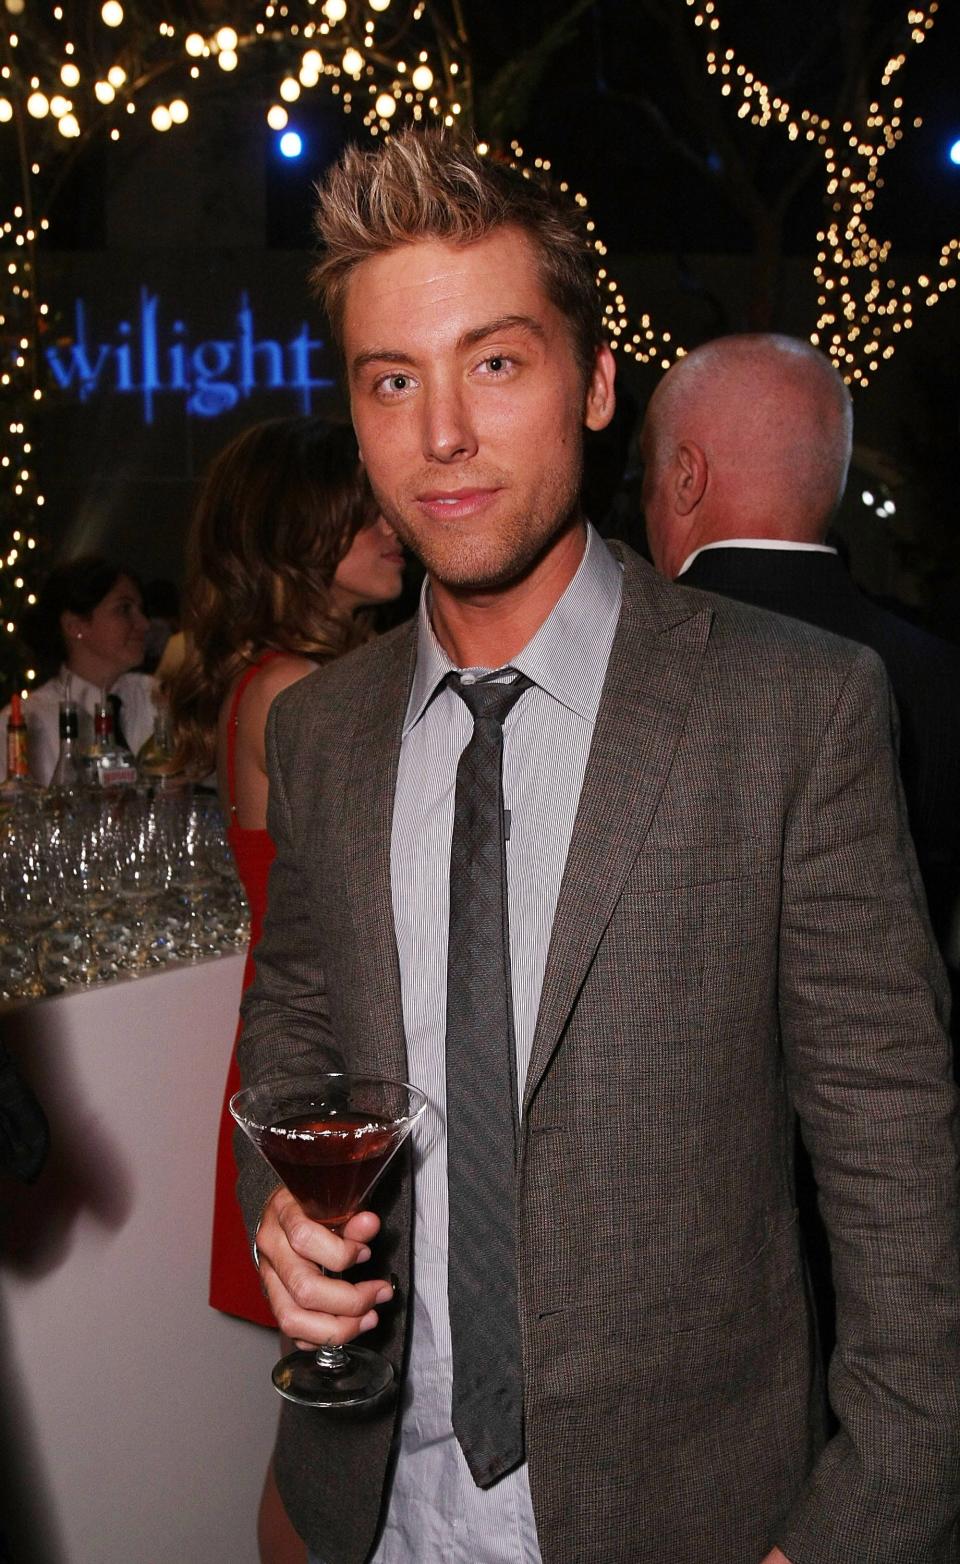 Lance Bass in a grey jacket holding a drink